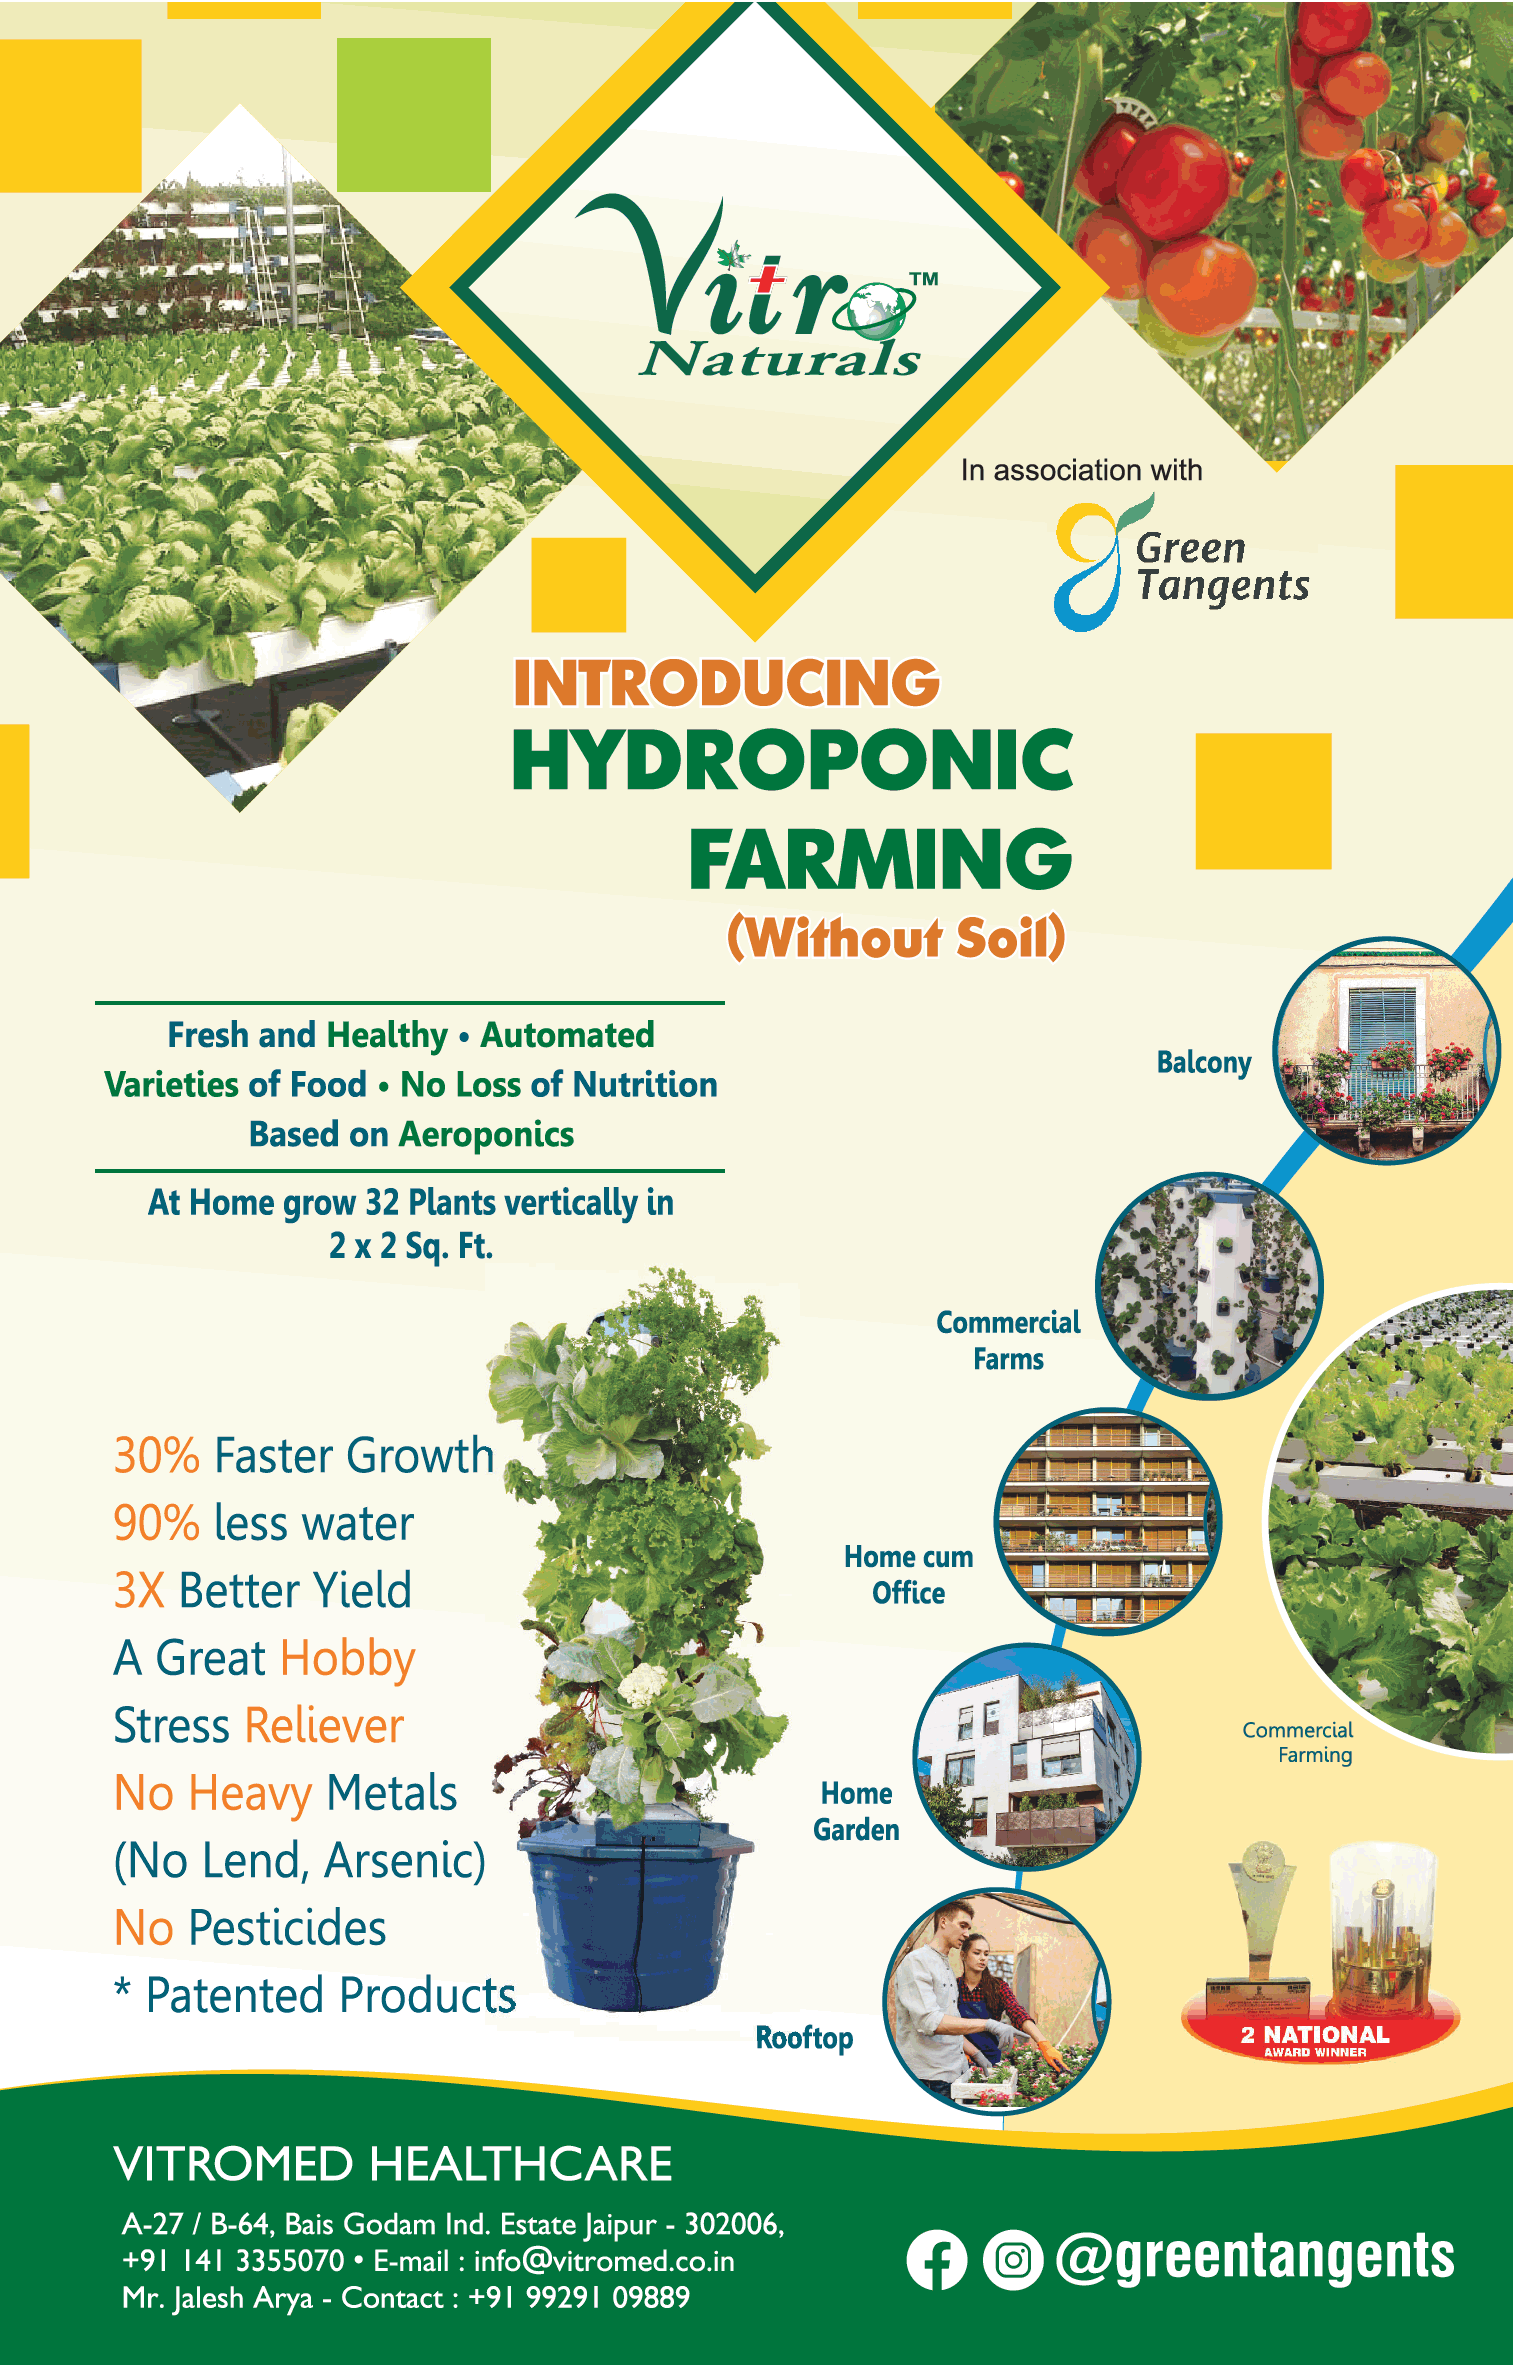 Vitro Naturals Introducing Hydroponic Farming Without Soil